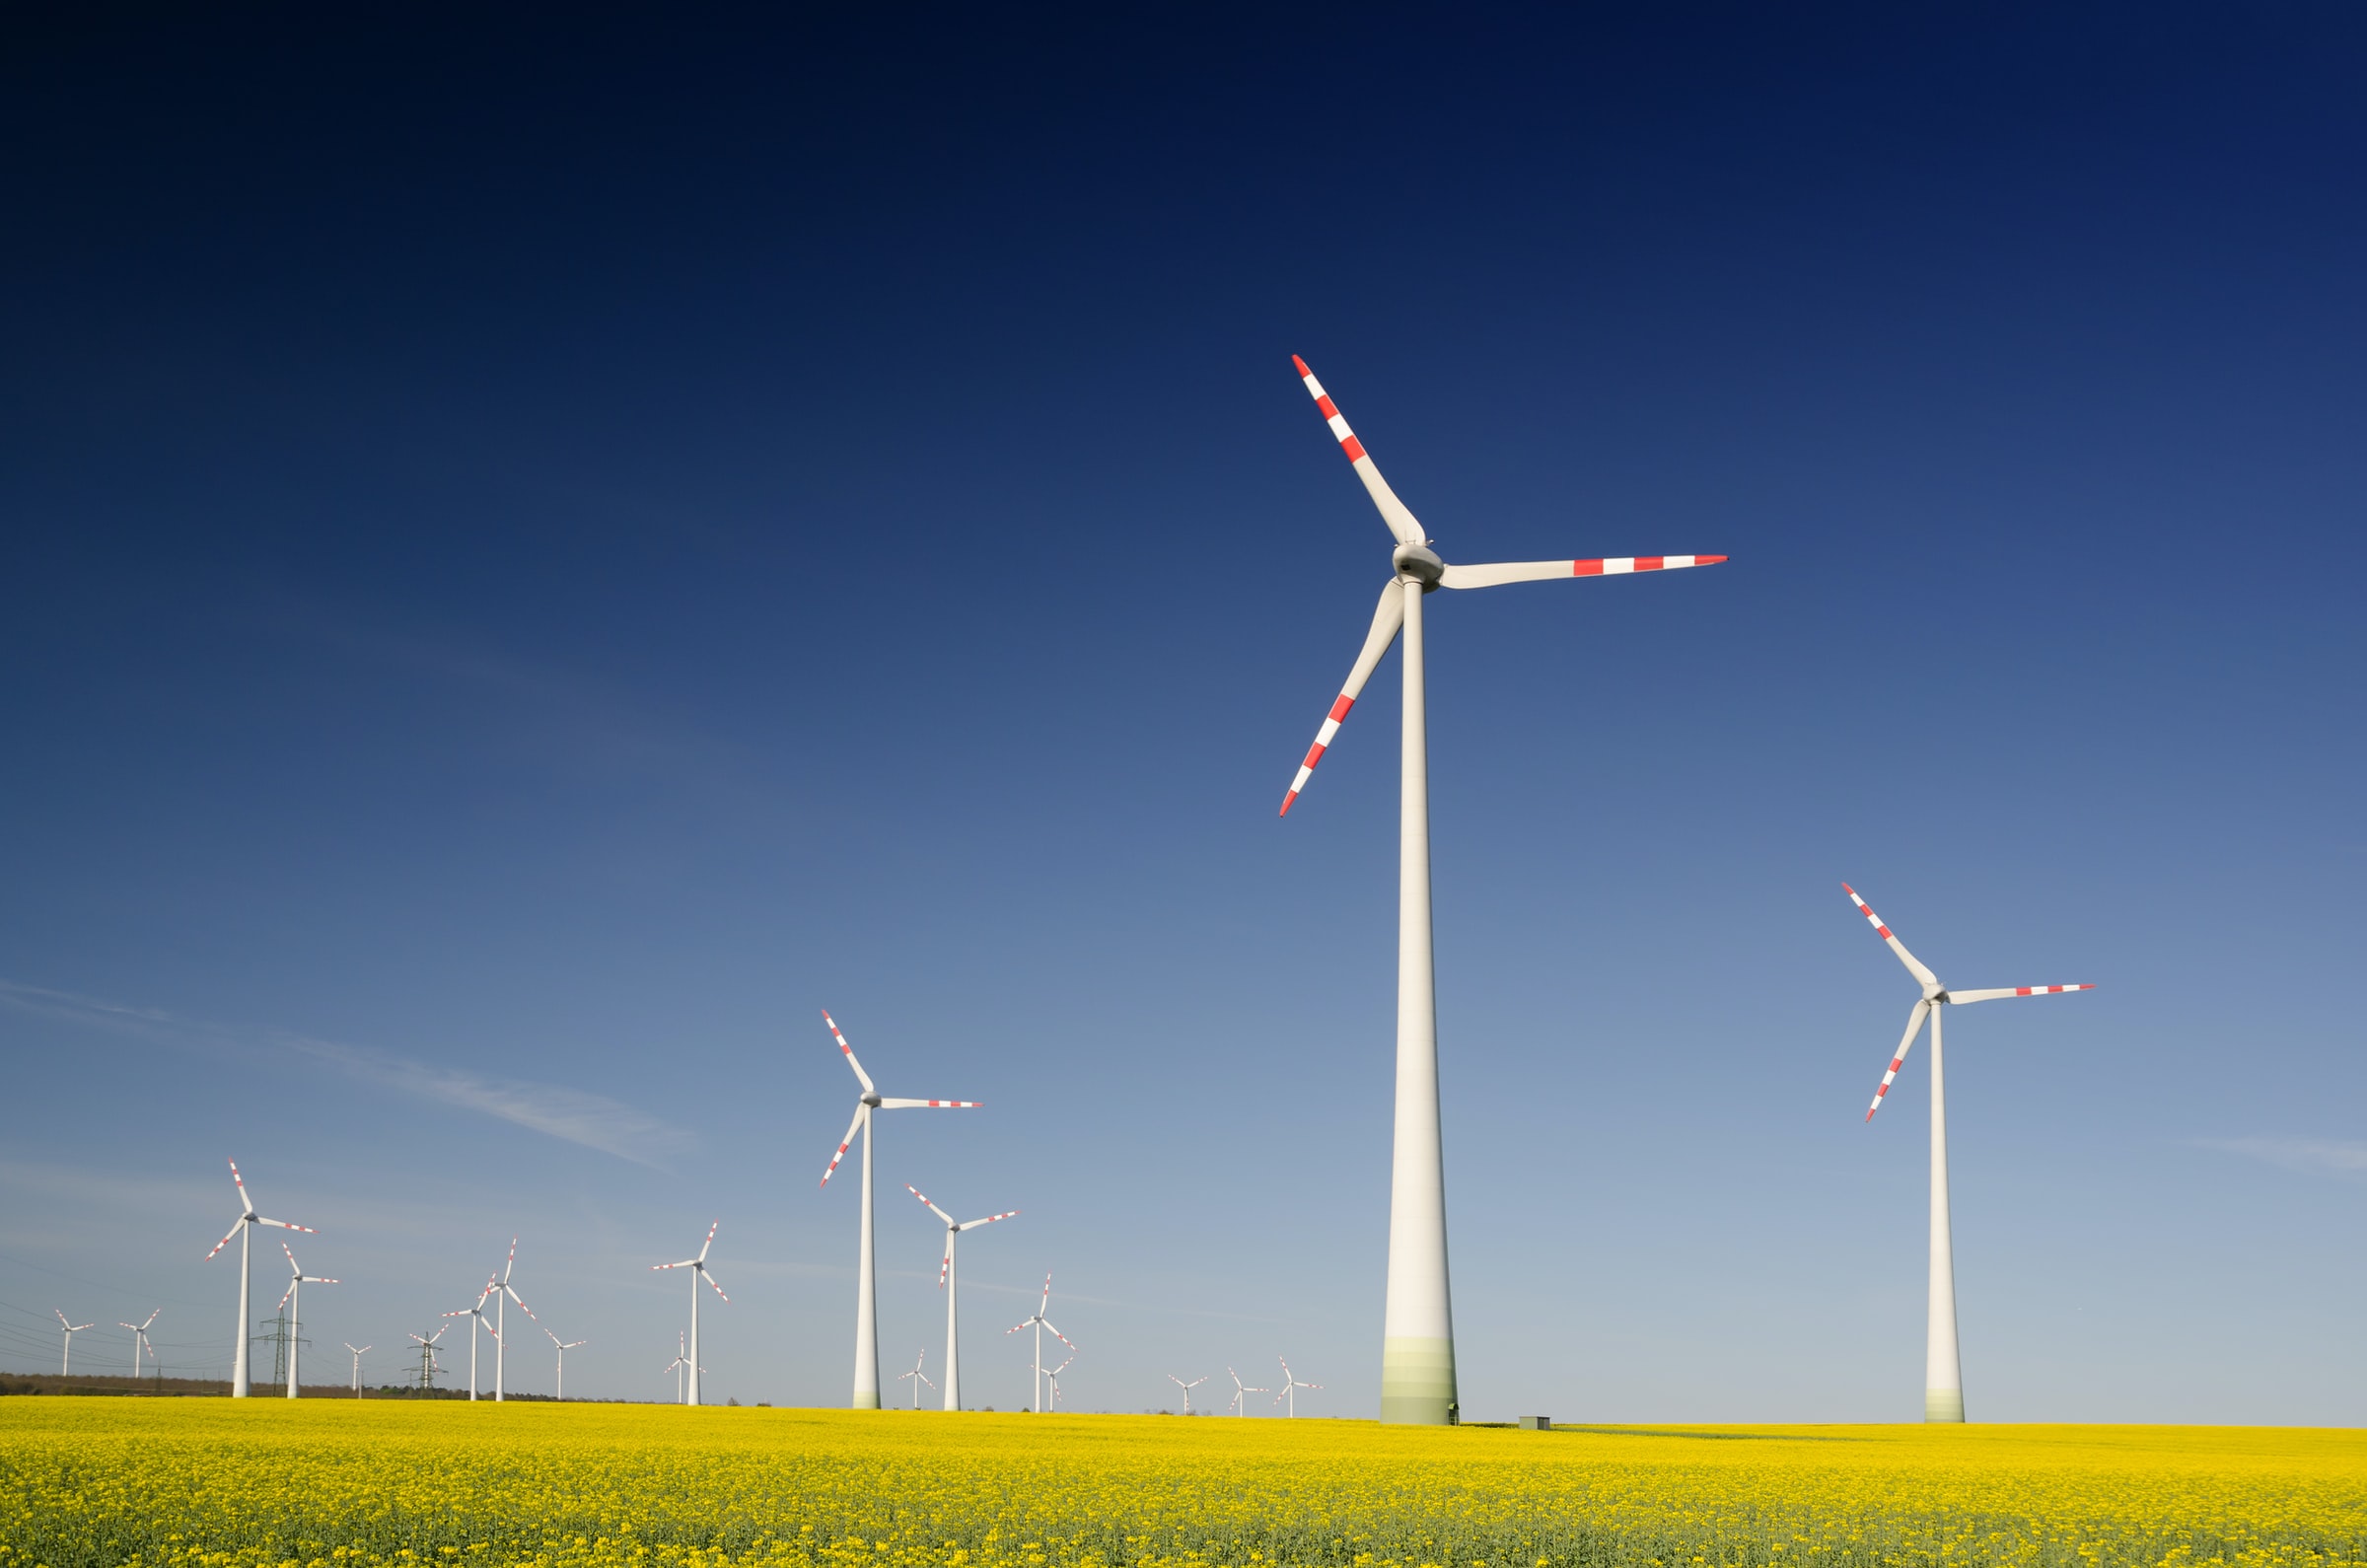 US renewable energy tops 170GW, according to American Clean Power Association